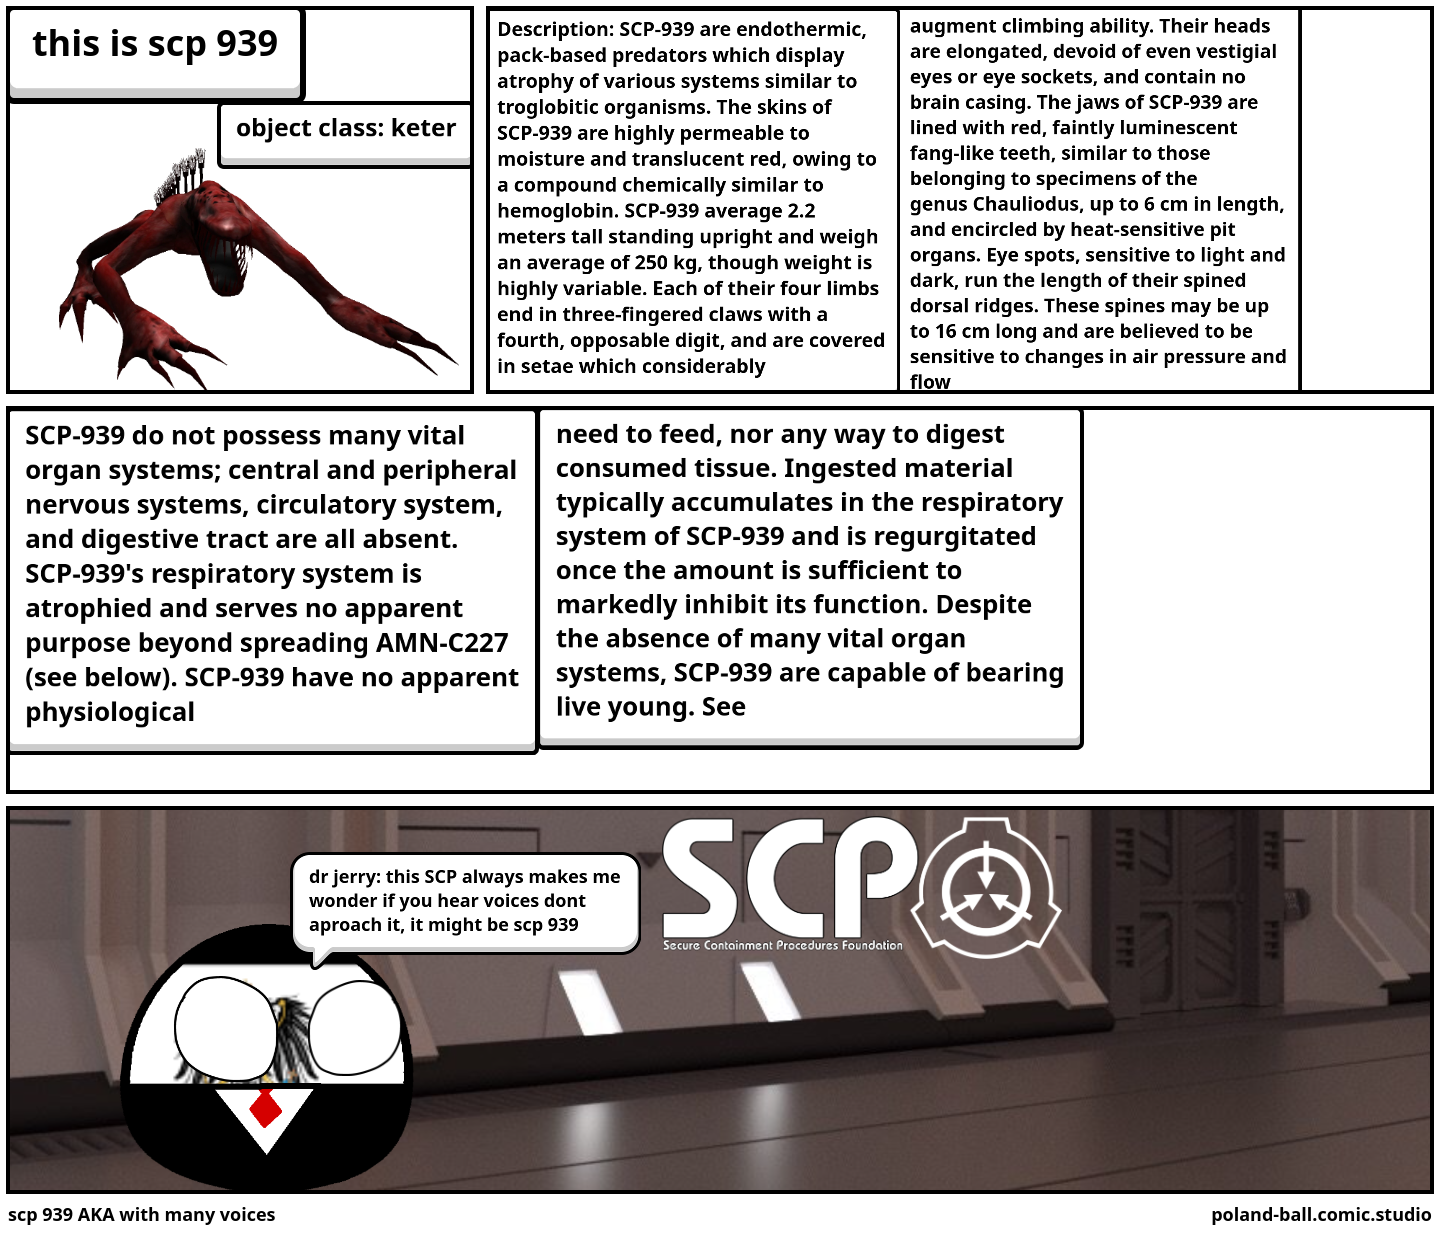 scp 939 AKA with many voices